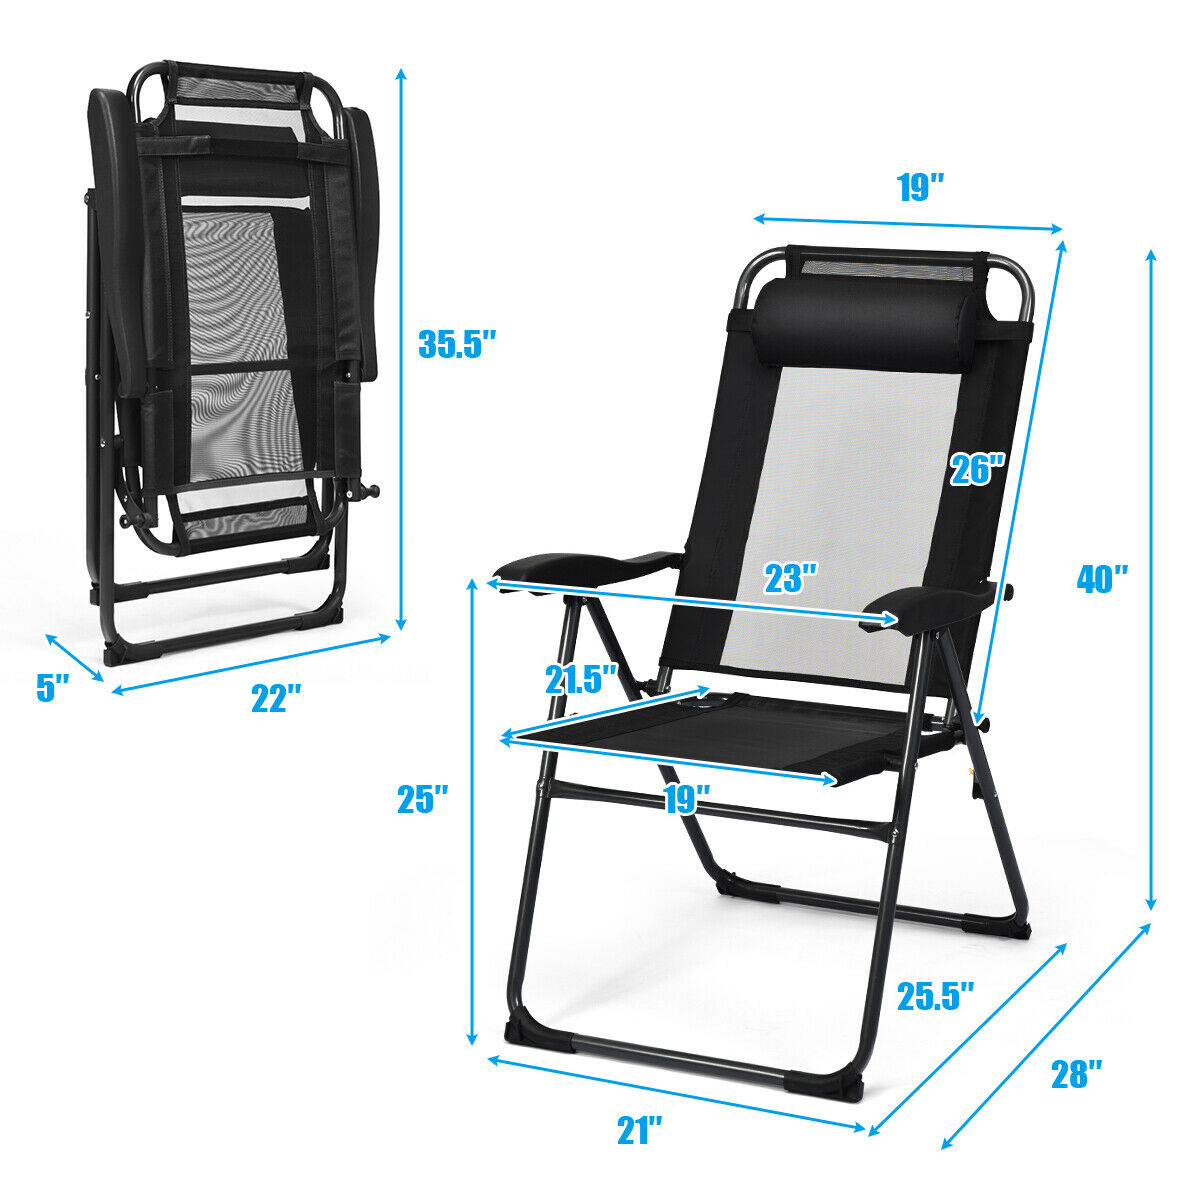 Gymax 2PC Folding Chairs Adjustable Reclining Chairs with Headrest Patio Garden Black - image 2 of 10